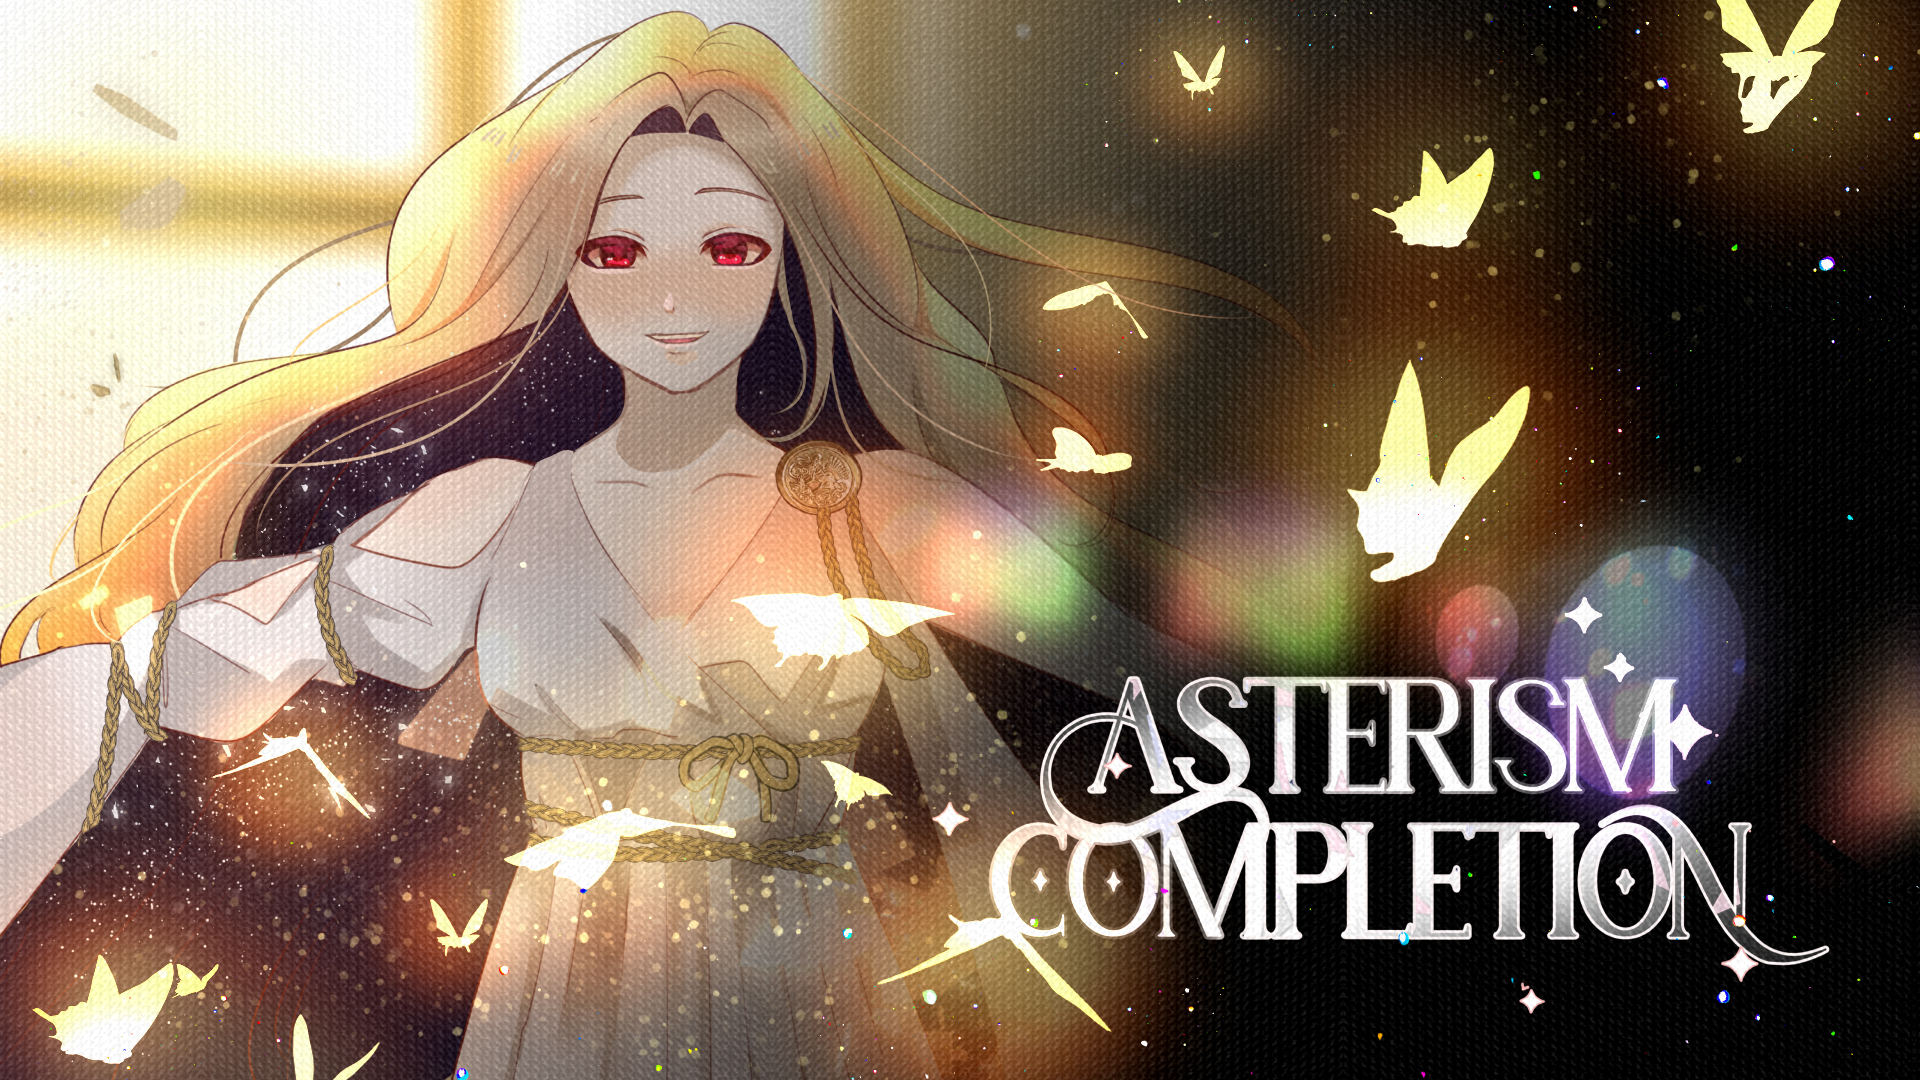 Asterism Completion - Cemong Studio